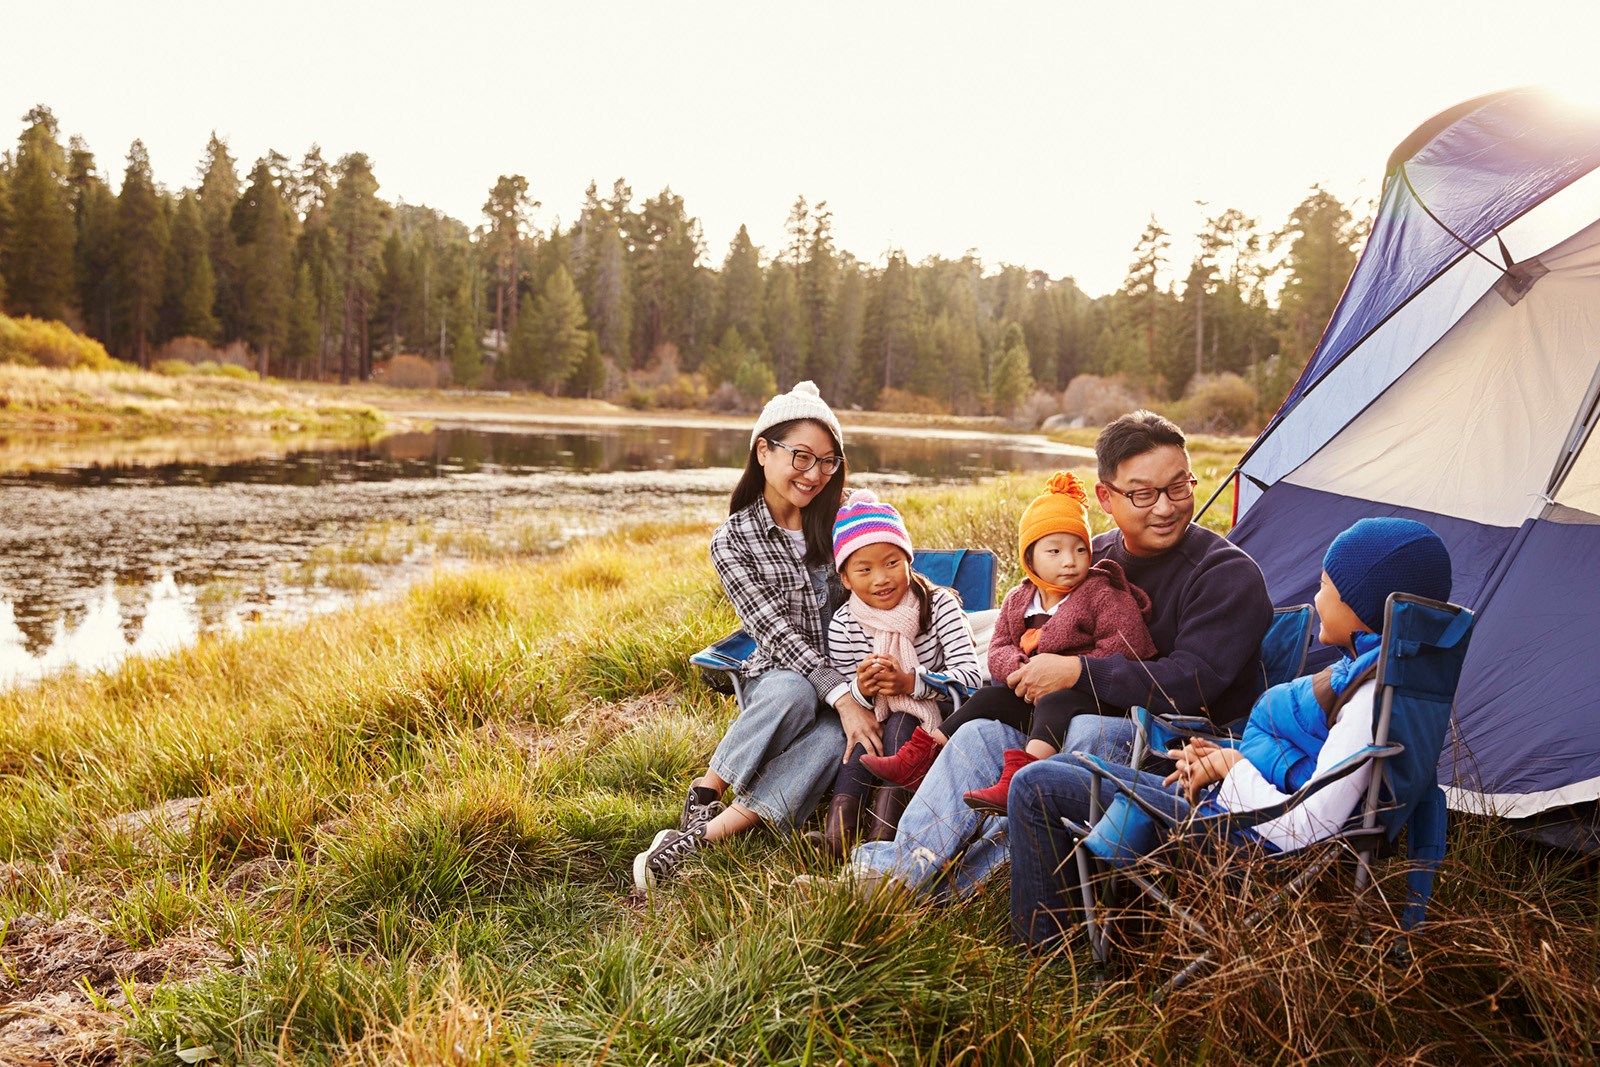 What To Wear While Camping for Every Season